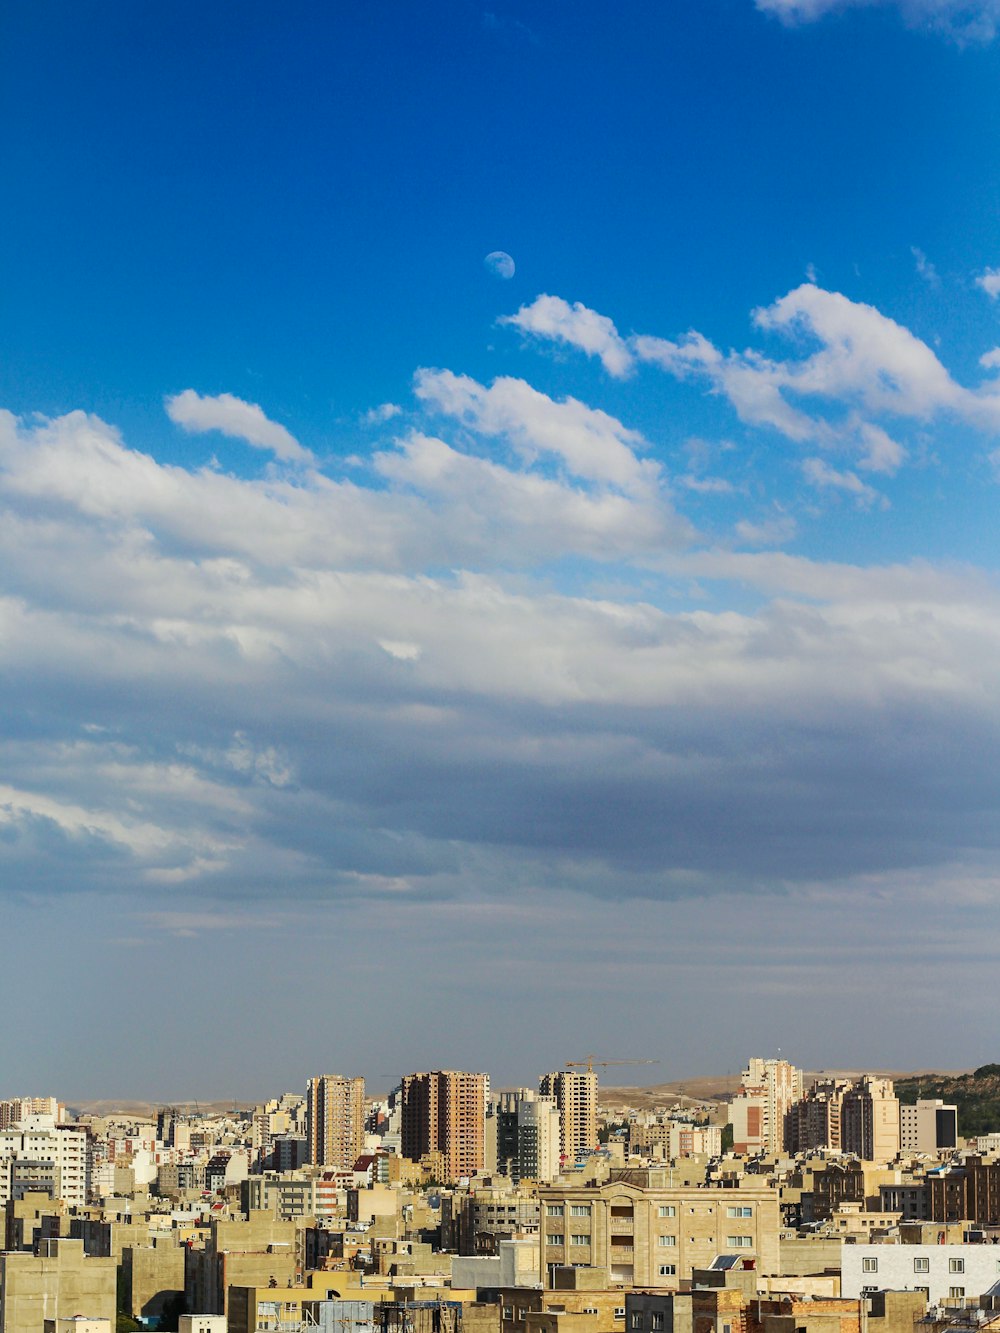 city buildings under blue sky and white clouds during daytime